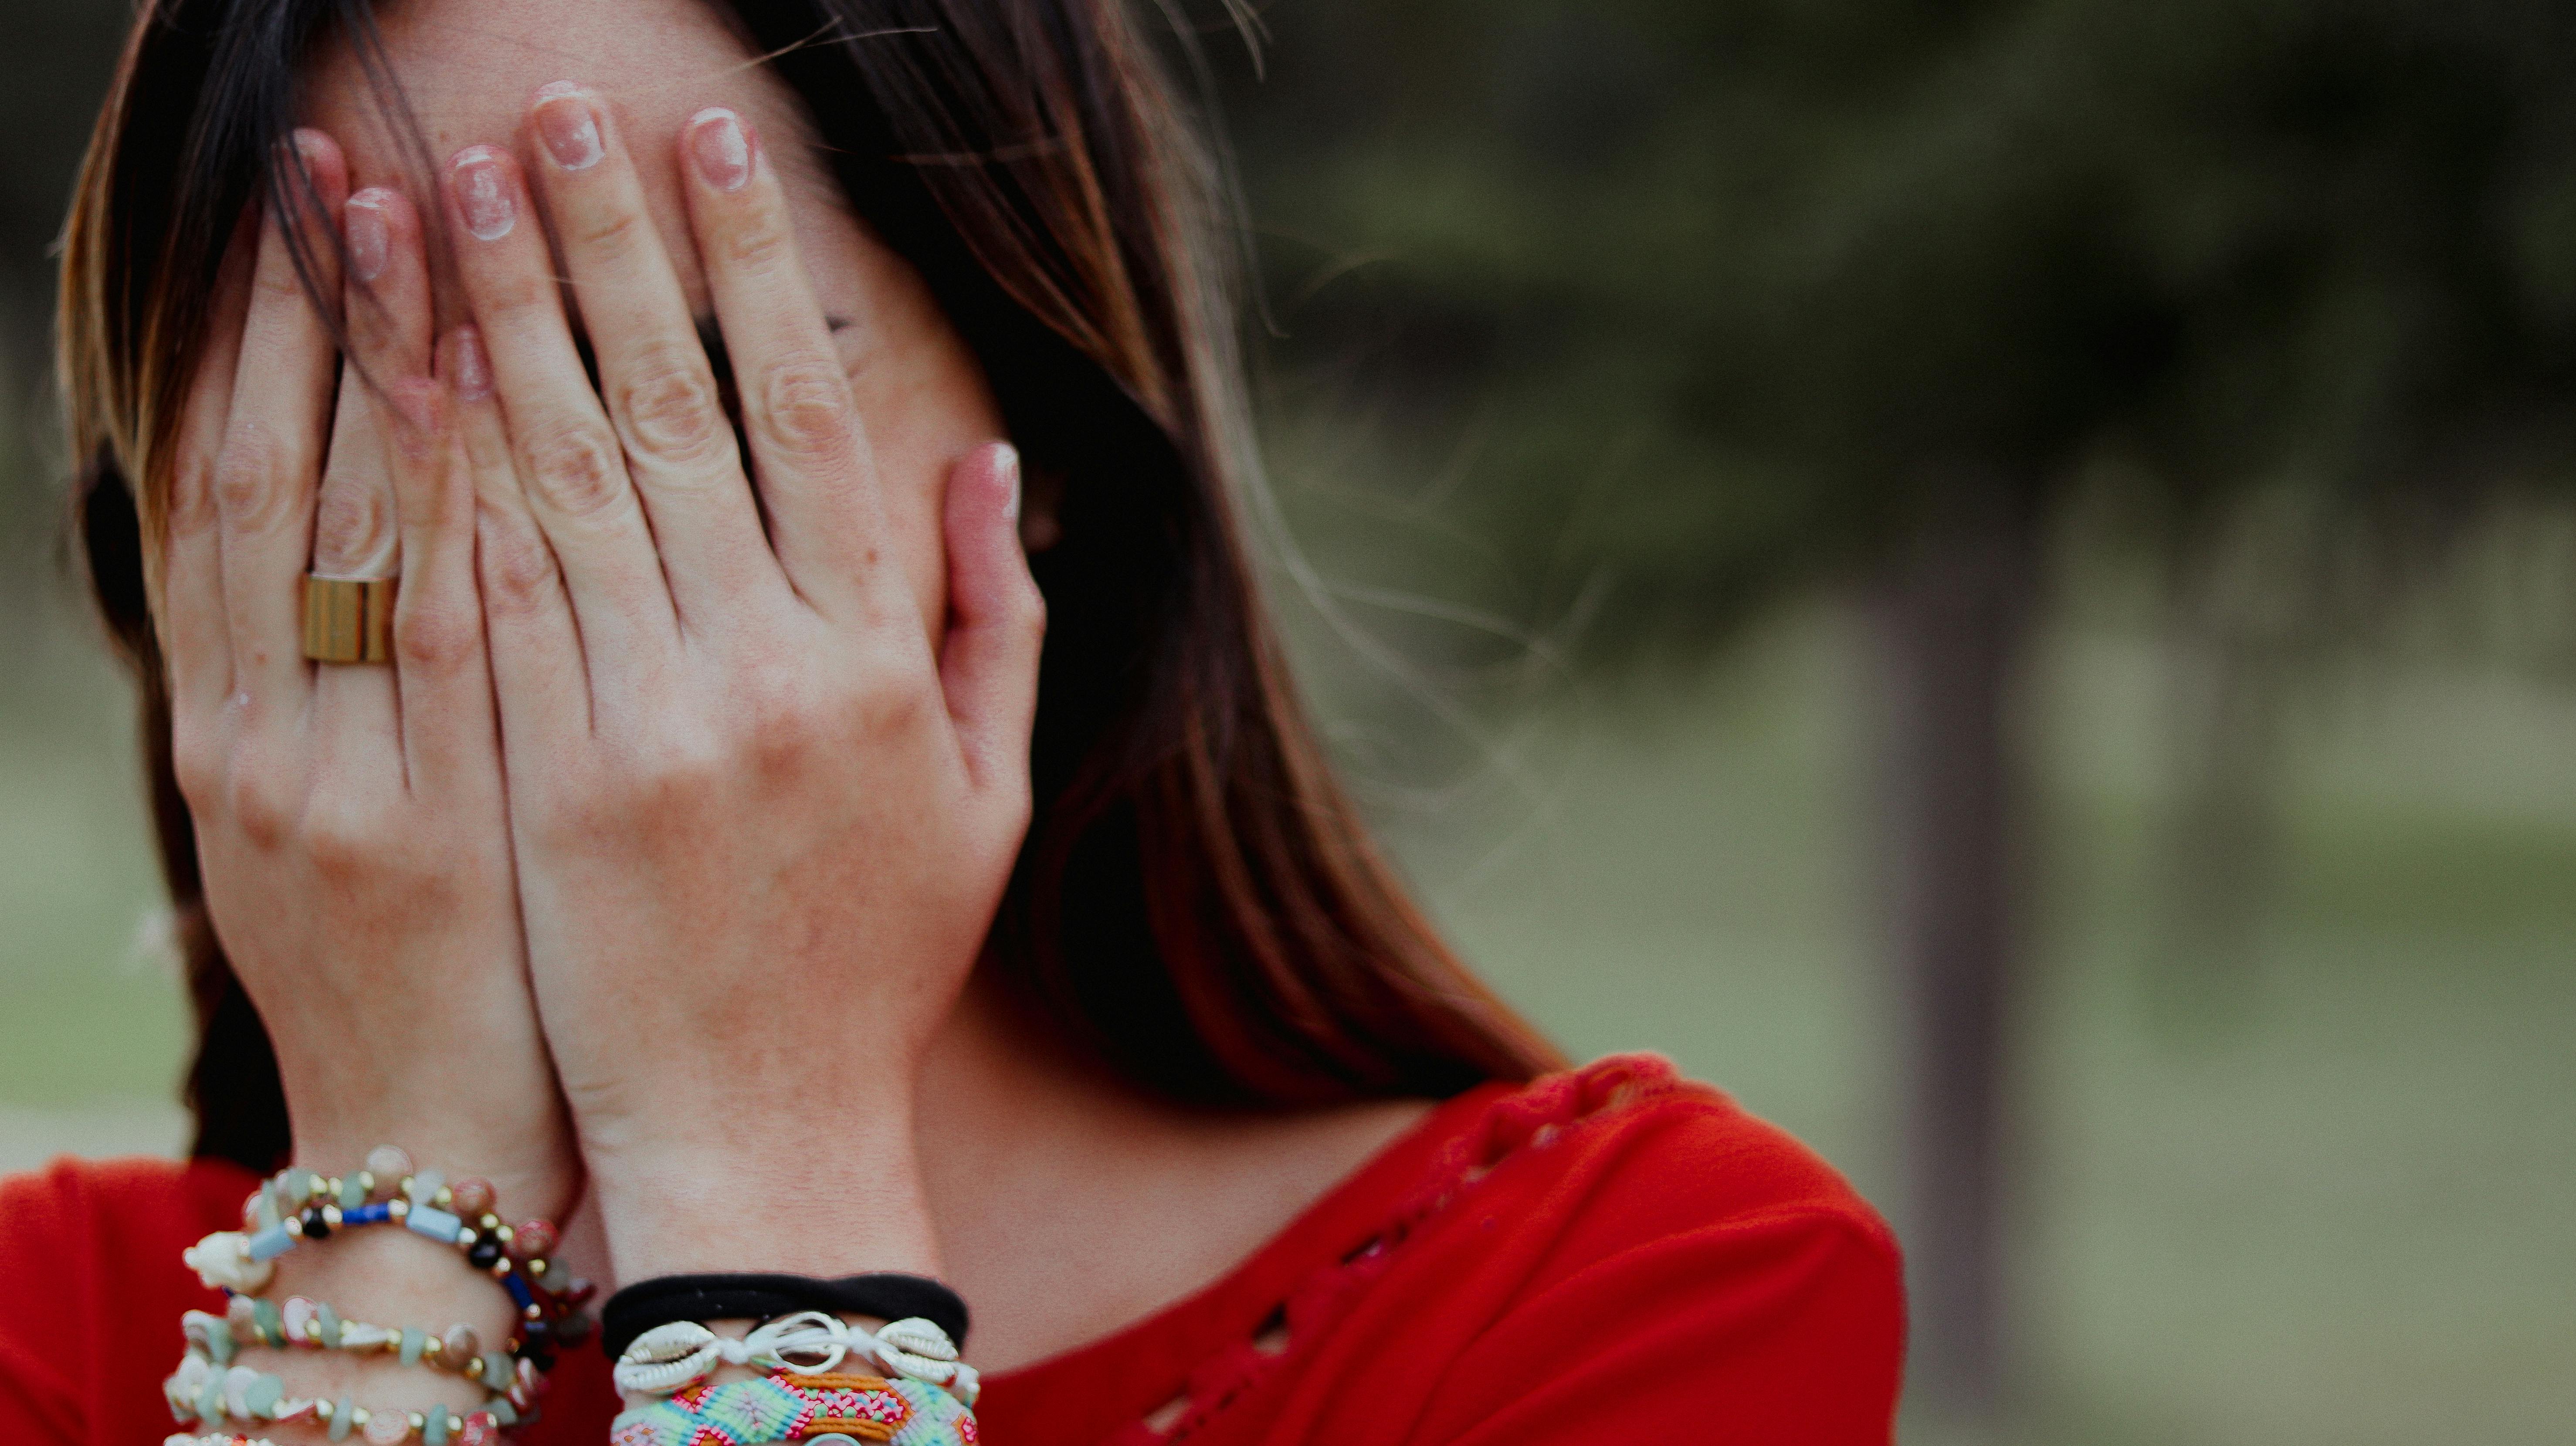 A woman covering her face with her palms | Source: Pexels